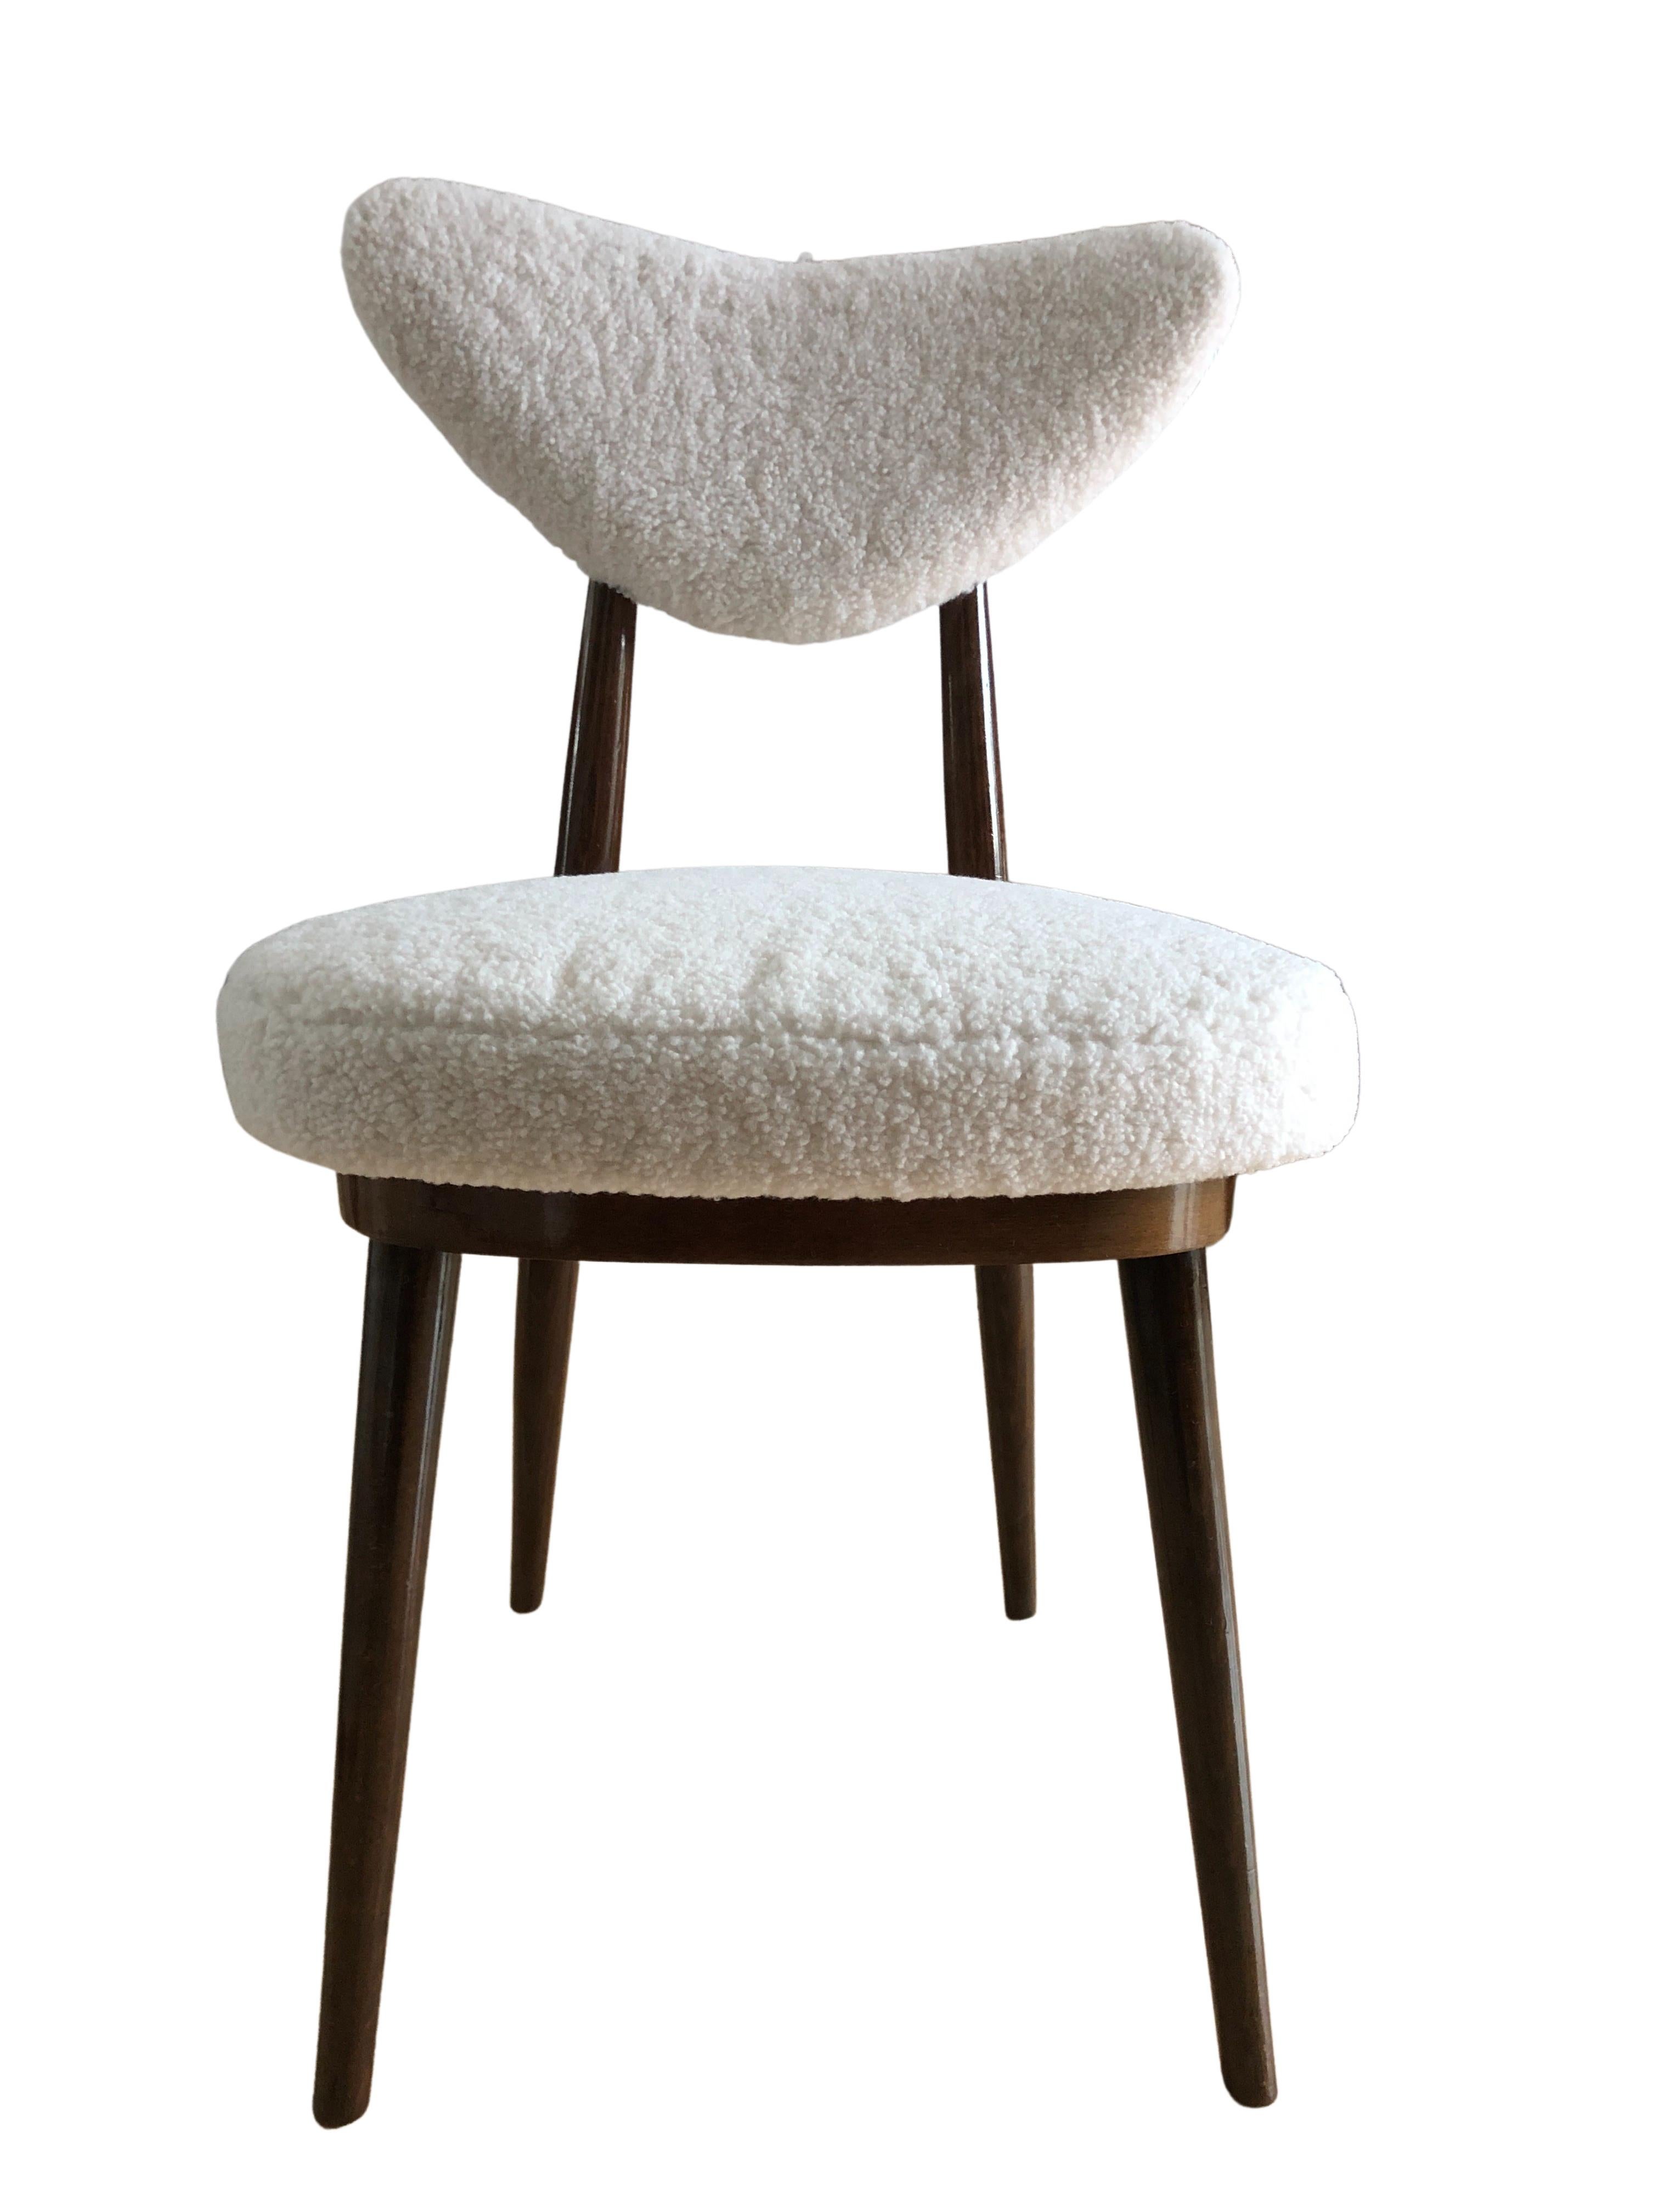 Hand-Crafted Set of Four Midcentury White bouclé Heart Chairs, by Kurmanowicz, 1960s For Sale